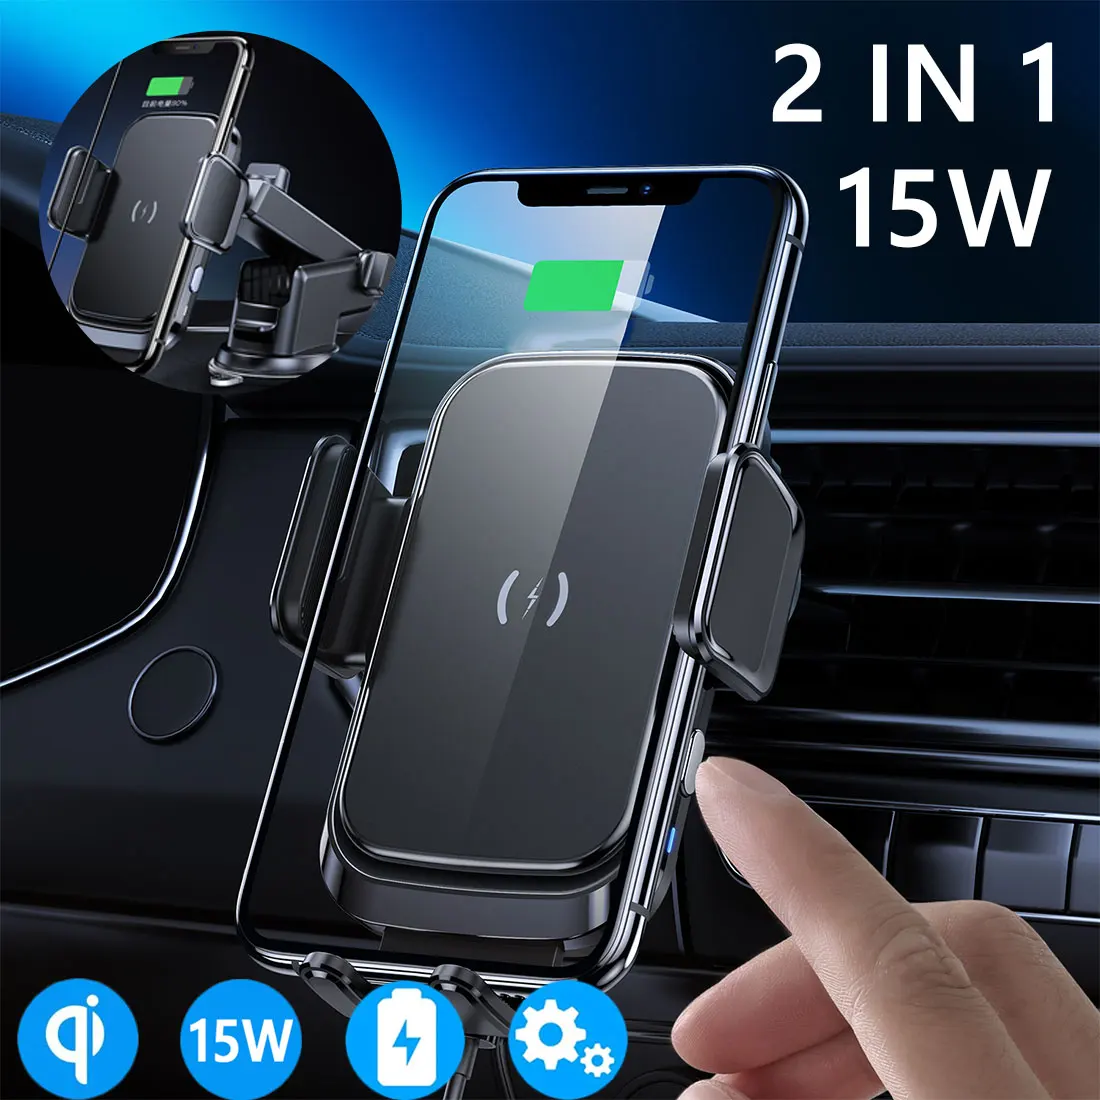 

15W QI Wireless Fast Charger Intelligent Infrared Car Mount Holder Stand For iPhone XS Samsung For Xiaomi MIX 2S Huawei Mate 20